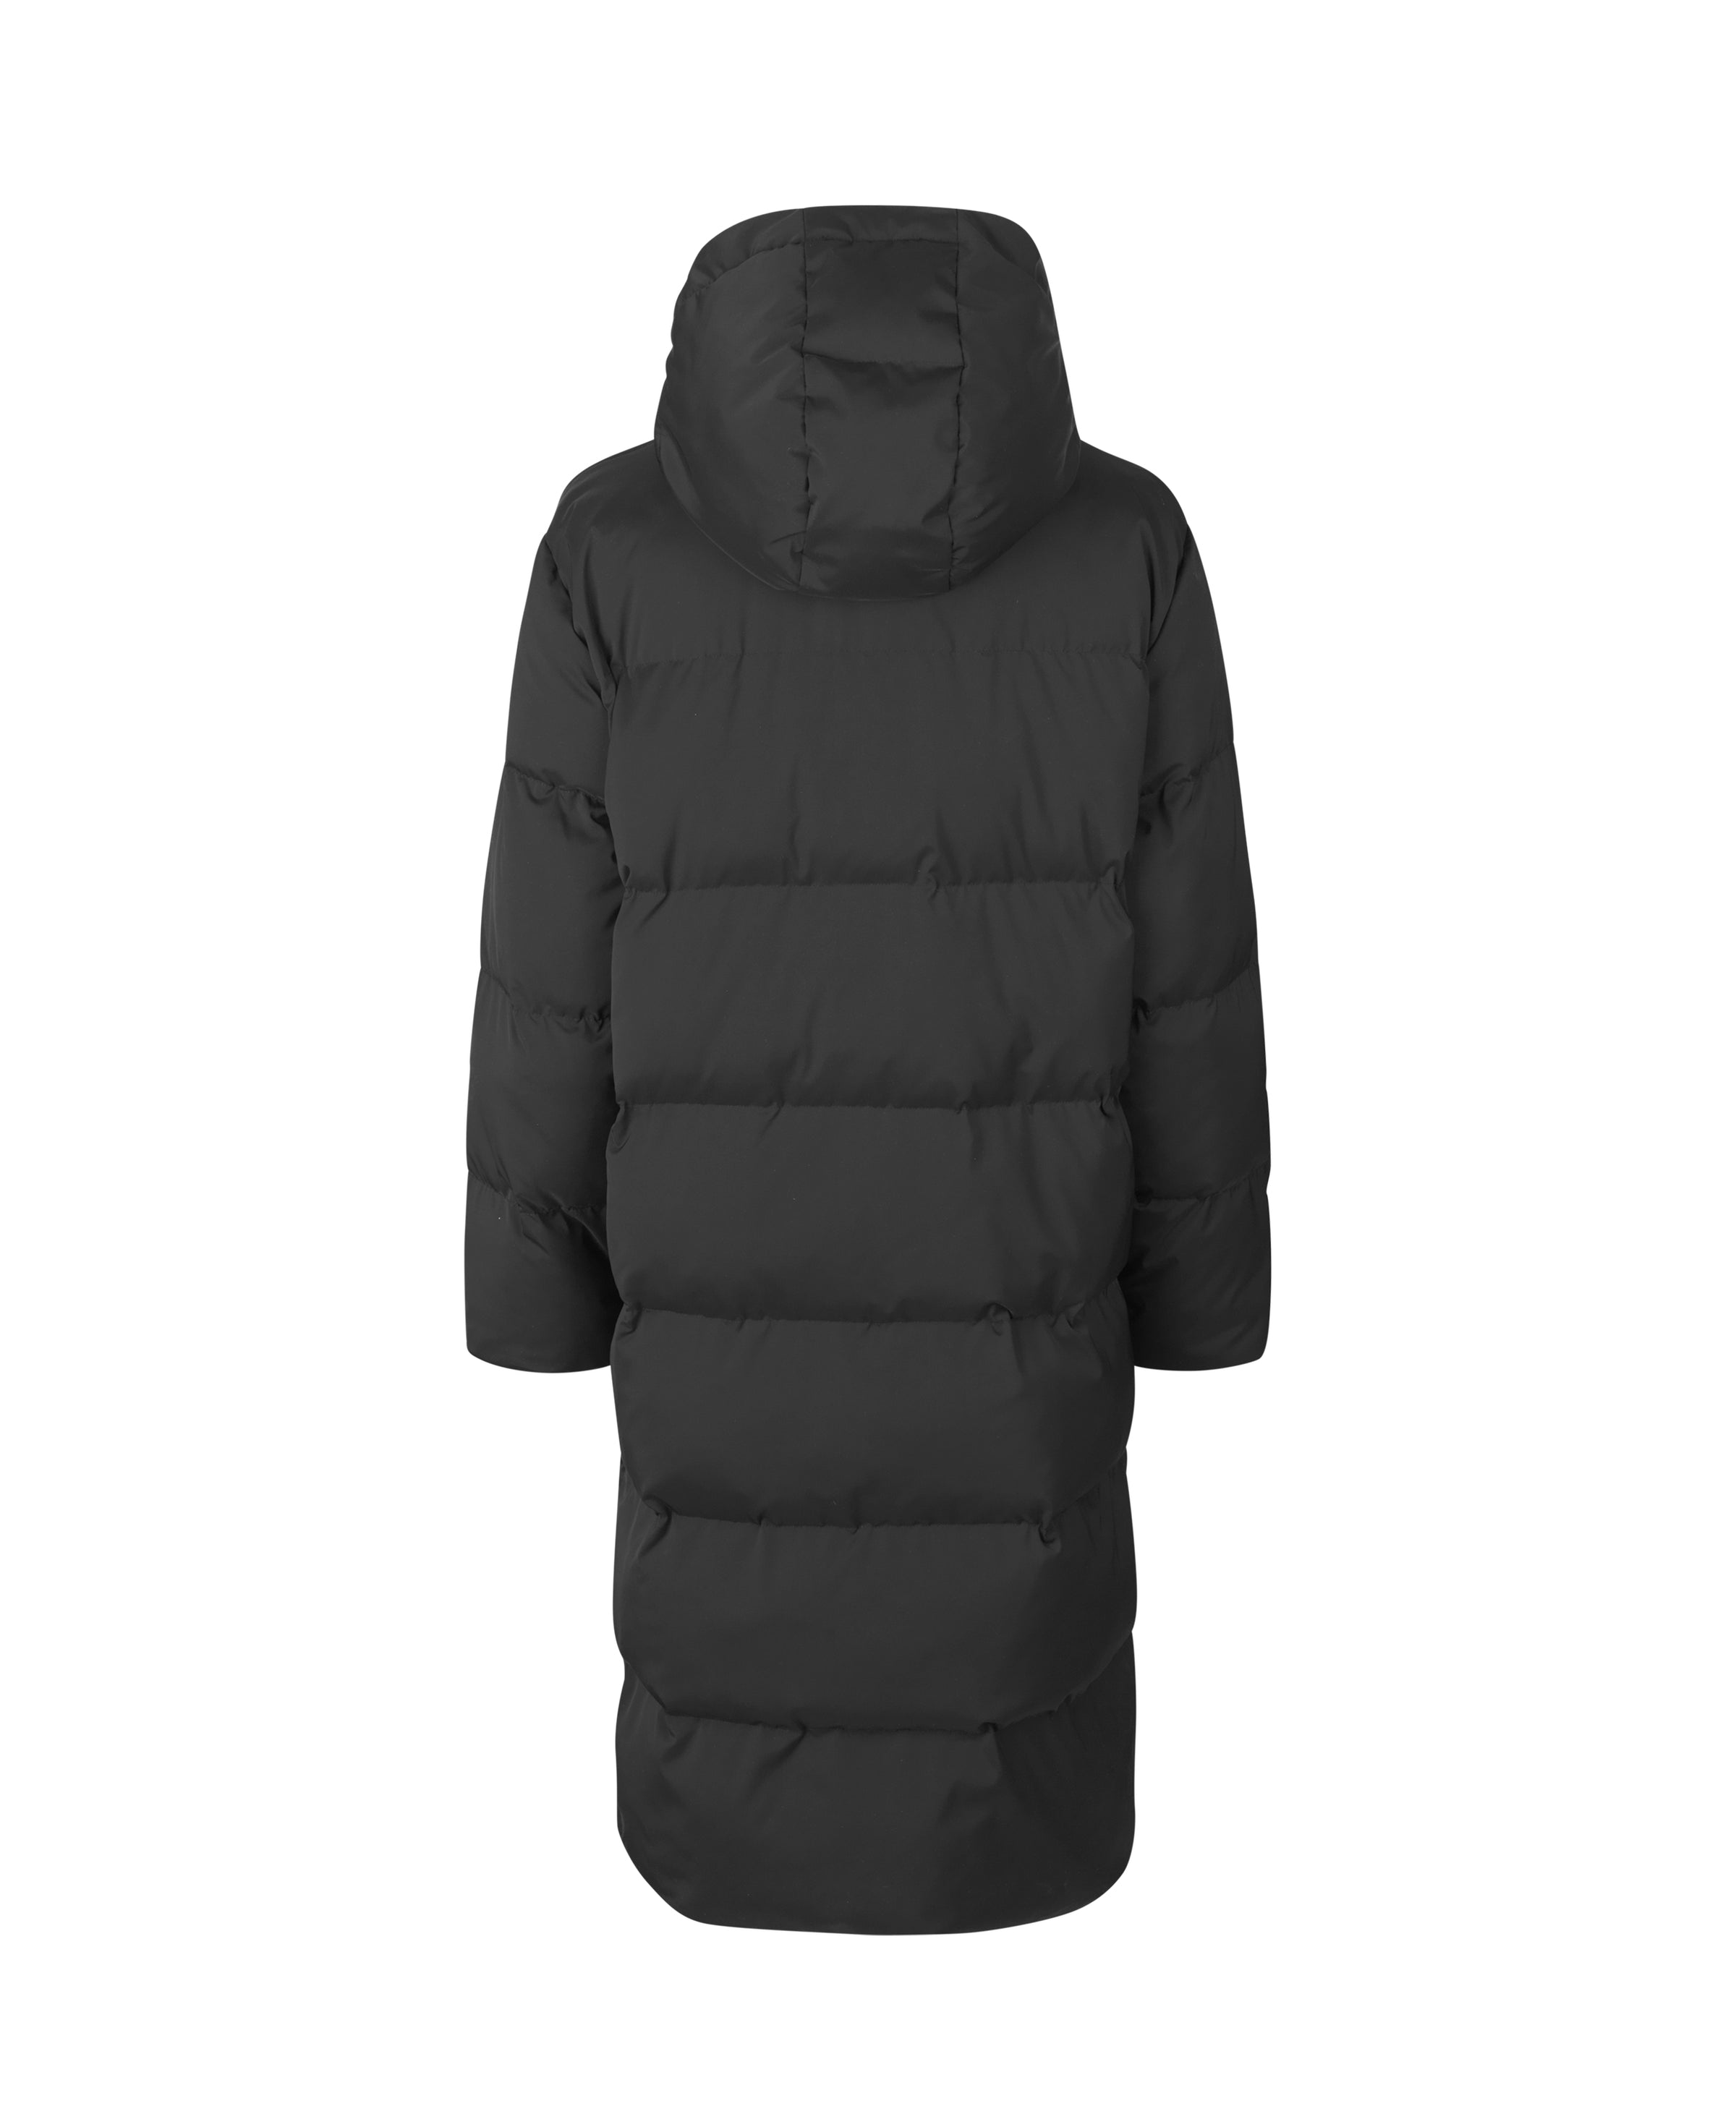 Long quilted and padded winter coat with full length zip fastening and large padded hood